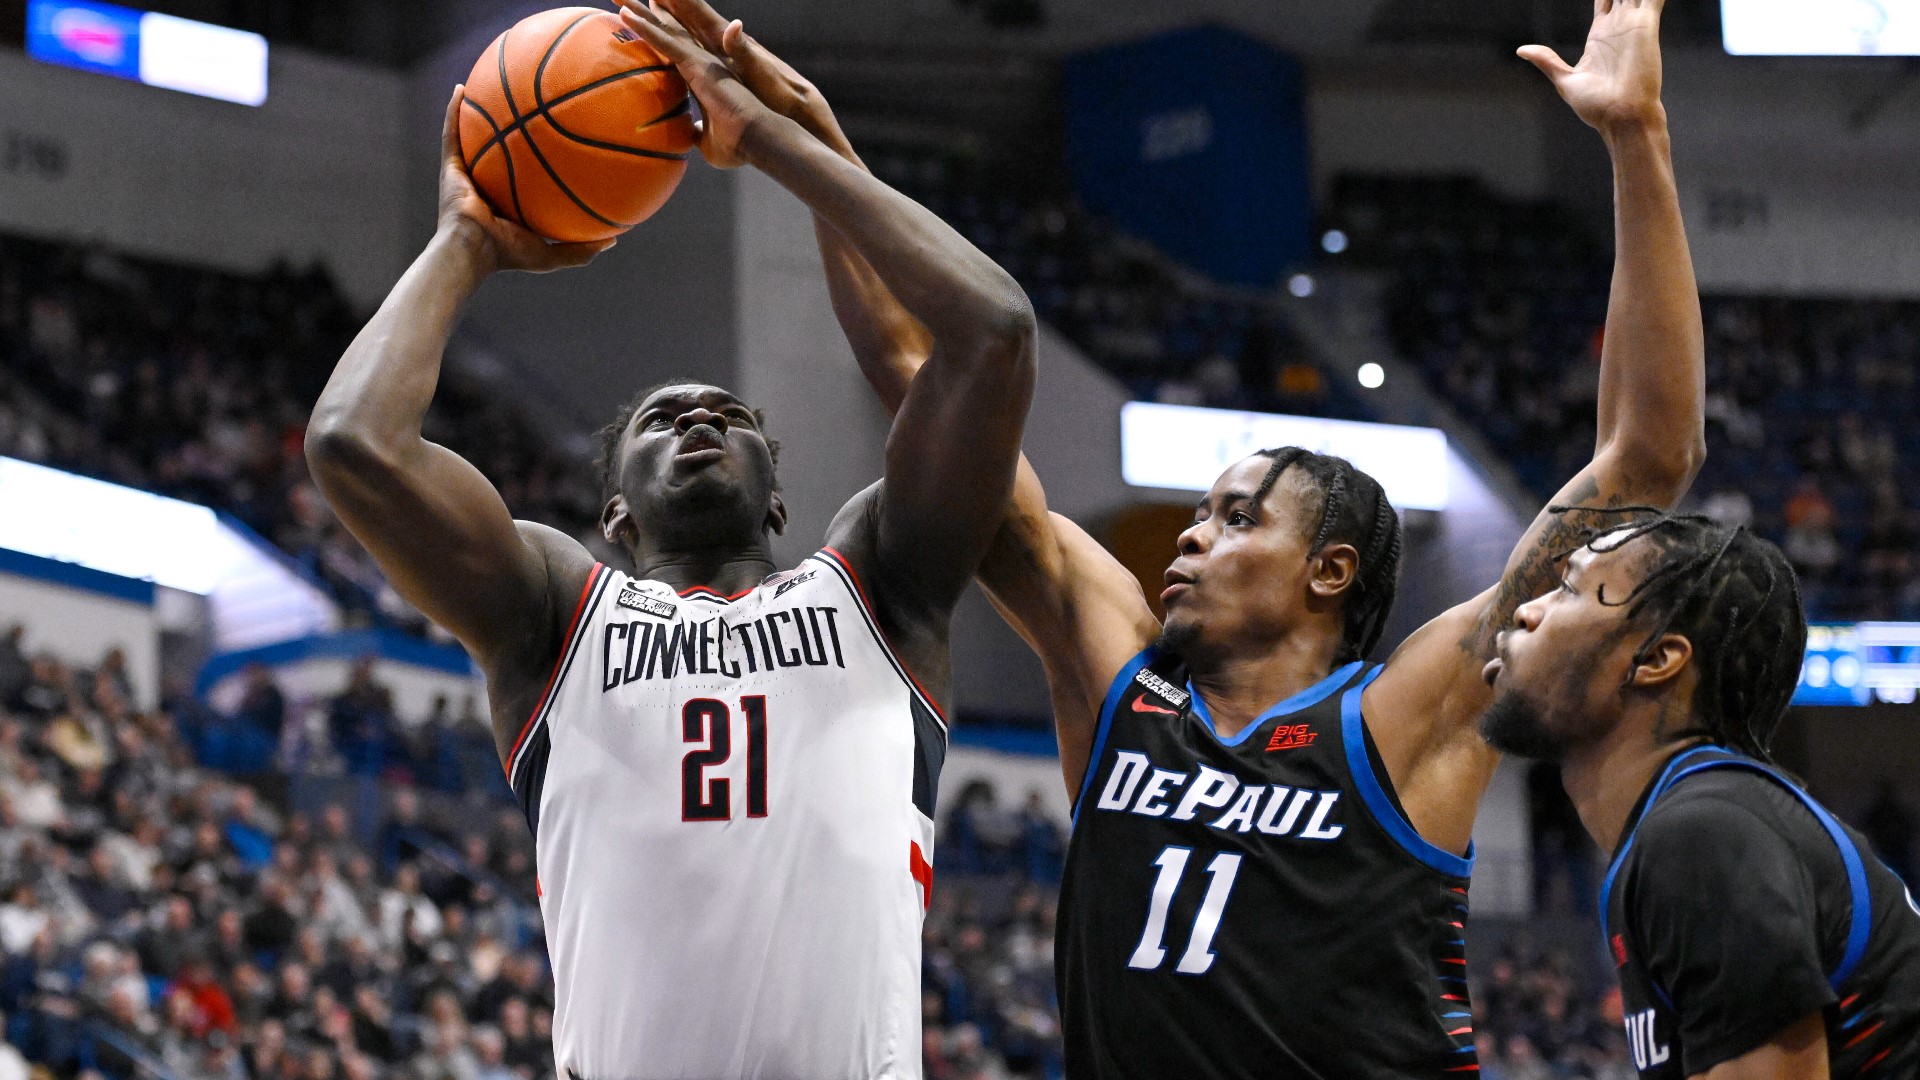 The Huskies' sights are now set on the Big East tournament as they've secured a top-five finish in the conference. They have one more game against Villanova.